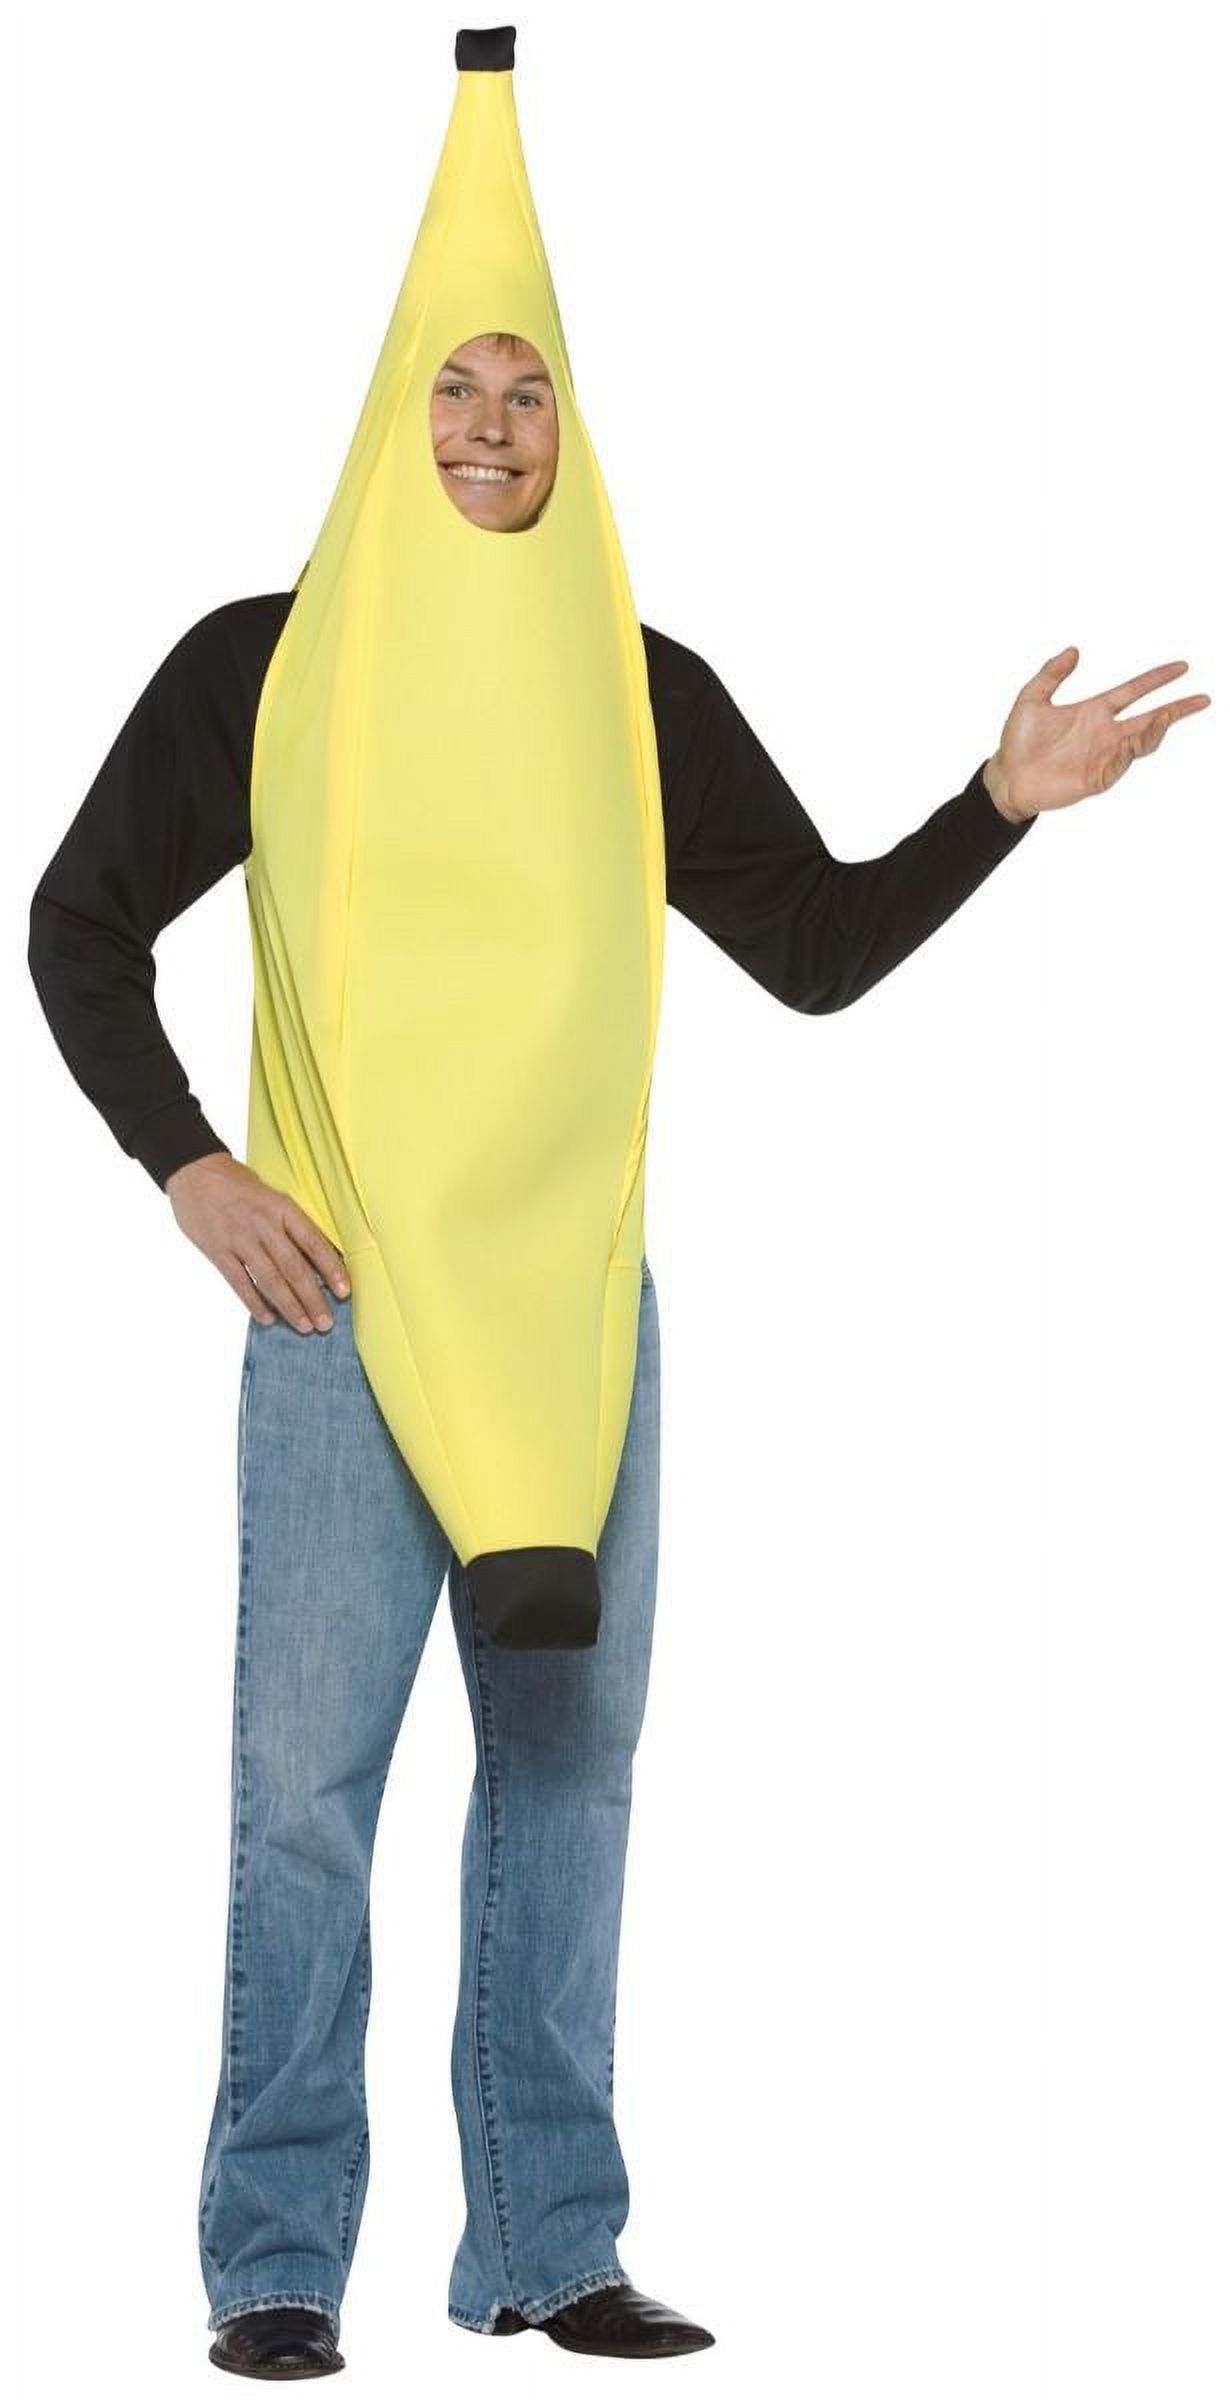 Banana Tunic Halloween Costume for Adults, Mens One Size Fit , by Rasta Imposta - image 1 of 5